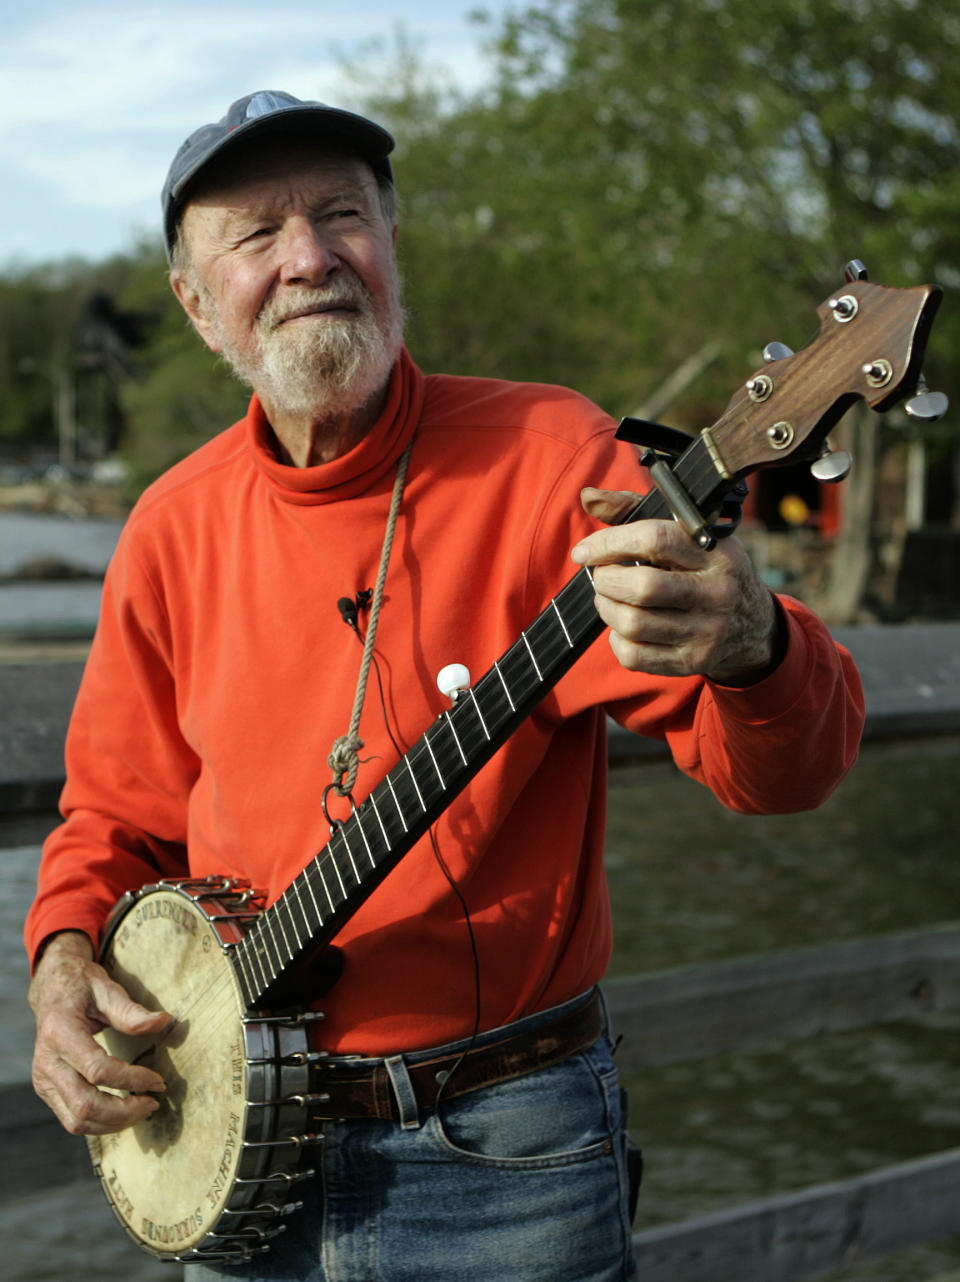 FILE - In this May 5, 2006 file photo, folk singer Pete Seeger plays his banjo in Beacon, N.Y. As what would have been his 95th birthday approaches, some wonder what would be a fitting tribute to the life of the singer/activist who was known for shunning personal accolades. (AP Photo/Frank Franklin II, File)